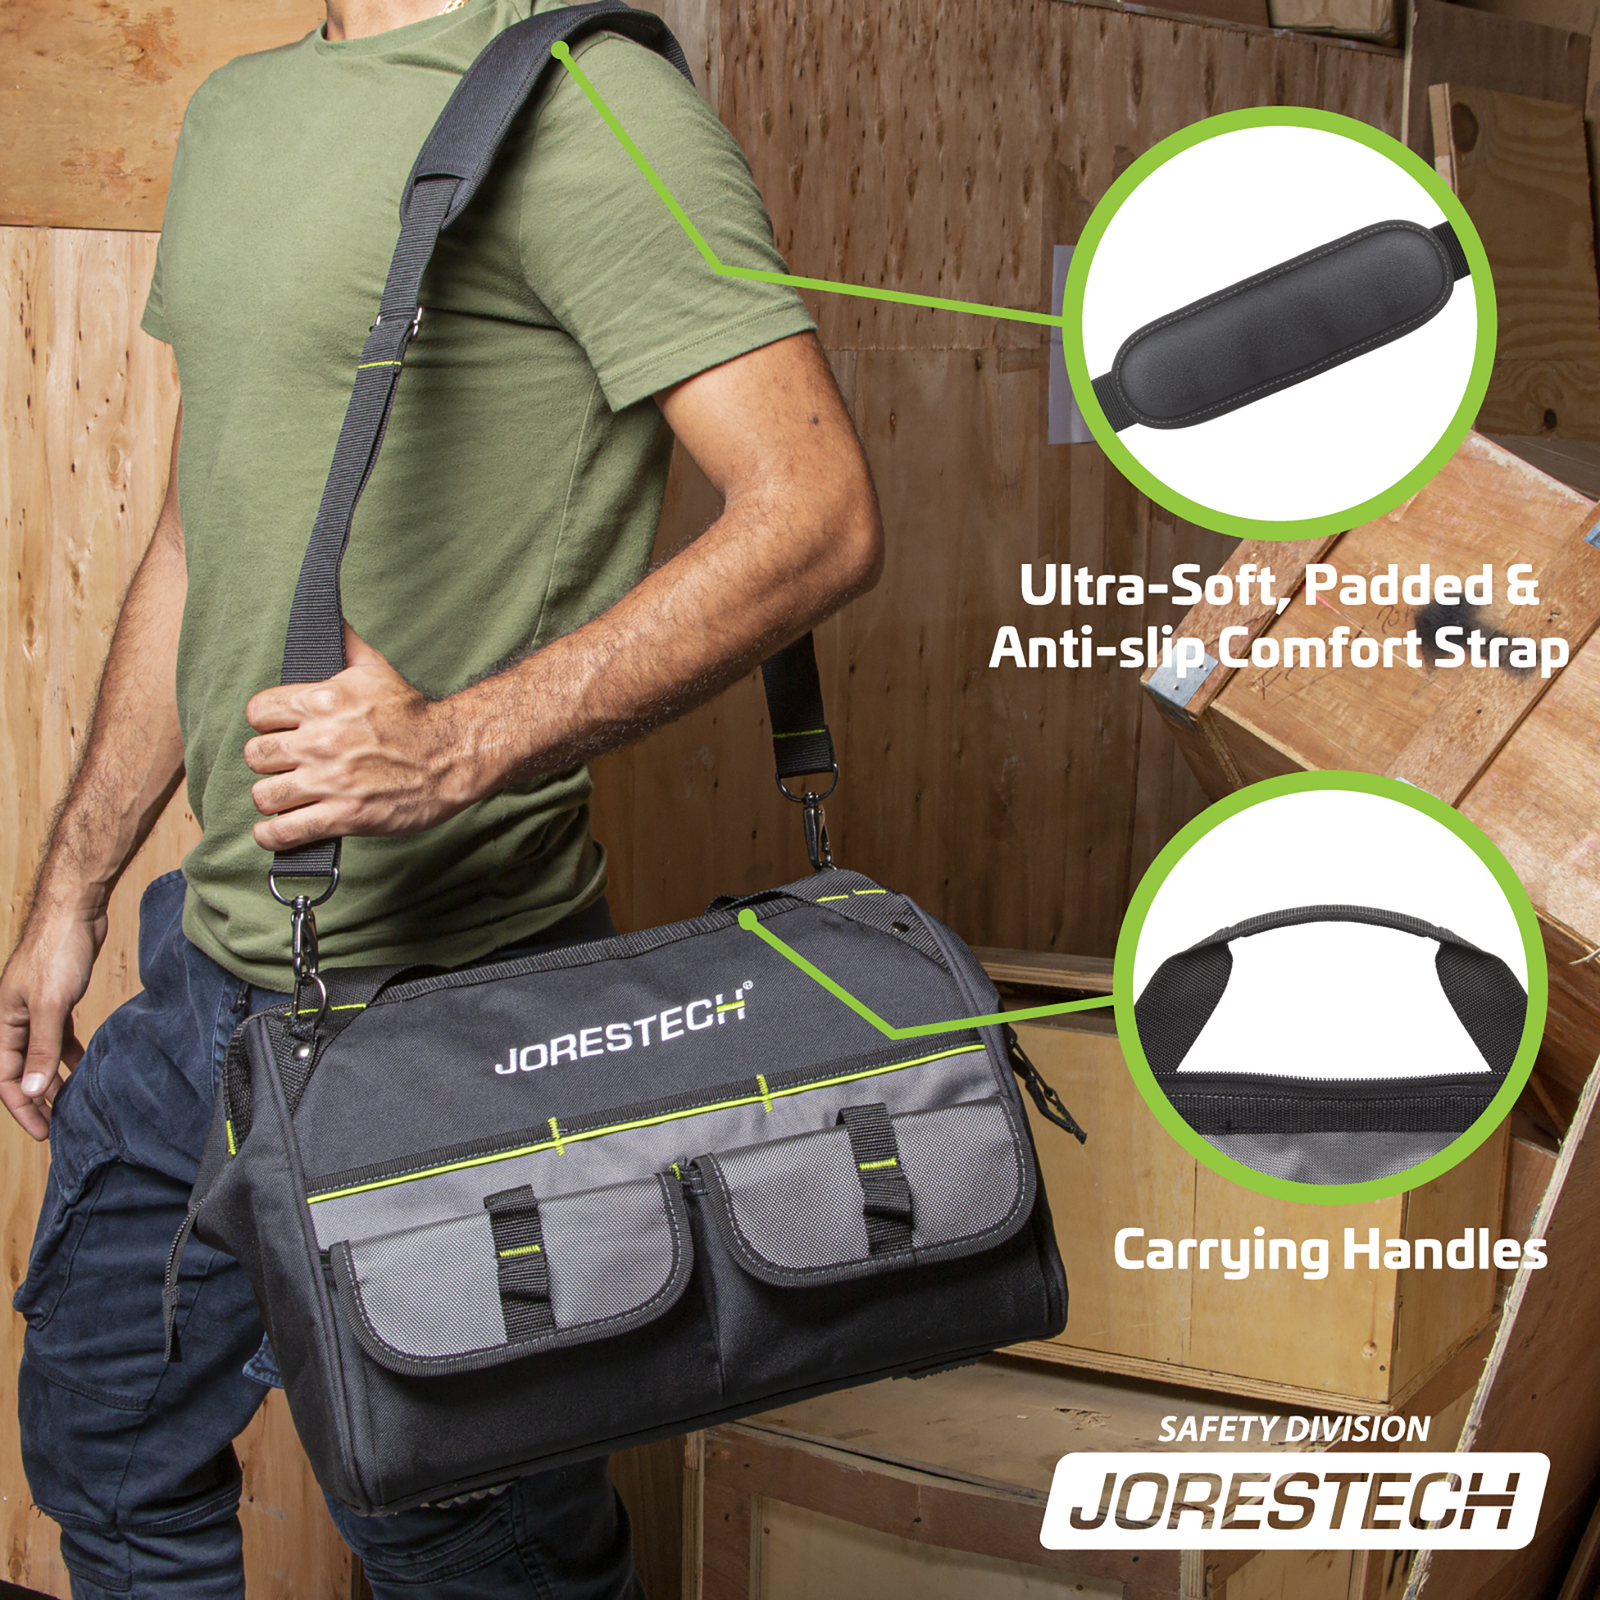 A worker carrying the JORESTECH multipurpose tool bag with many wood boxes in the background. 2 cal outs mention ultra soft padded & anti-slip comfort shoulder strap, and carrying handles